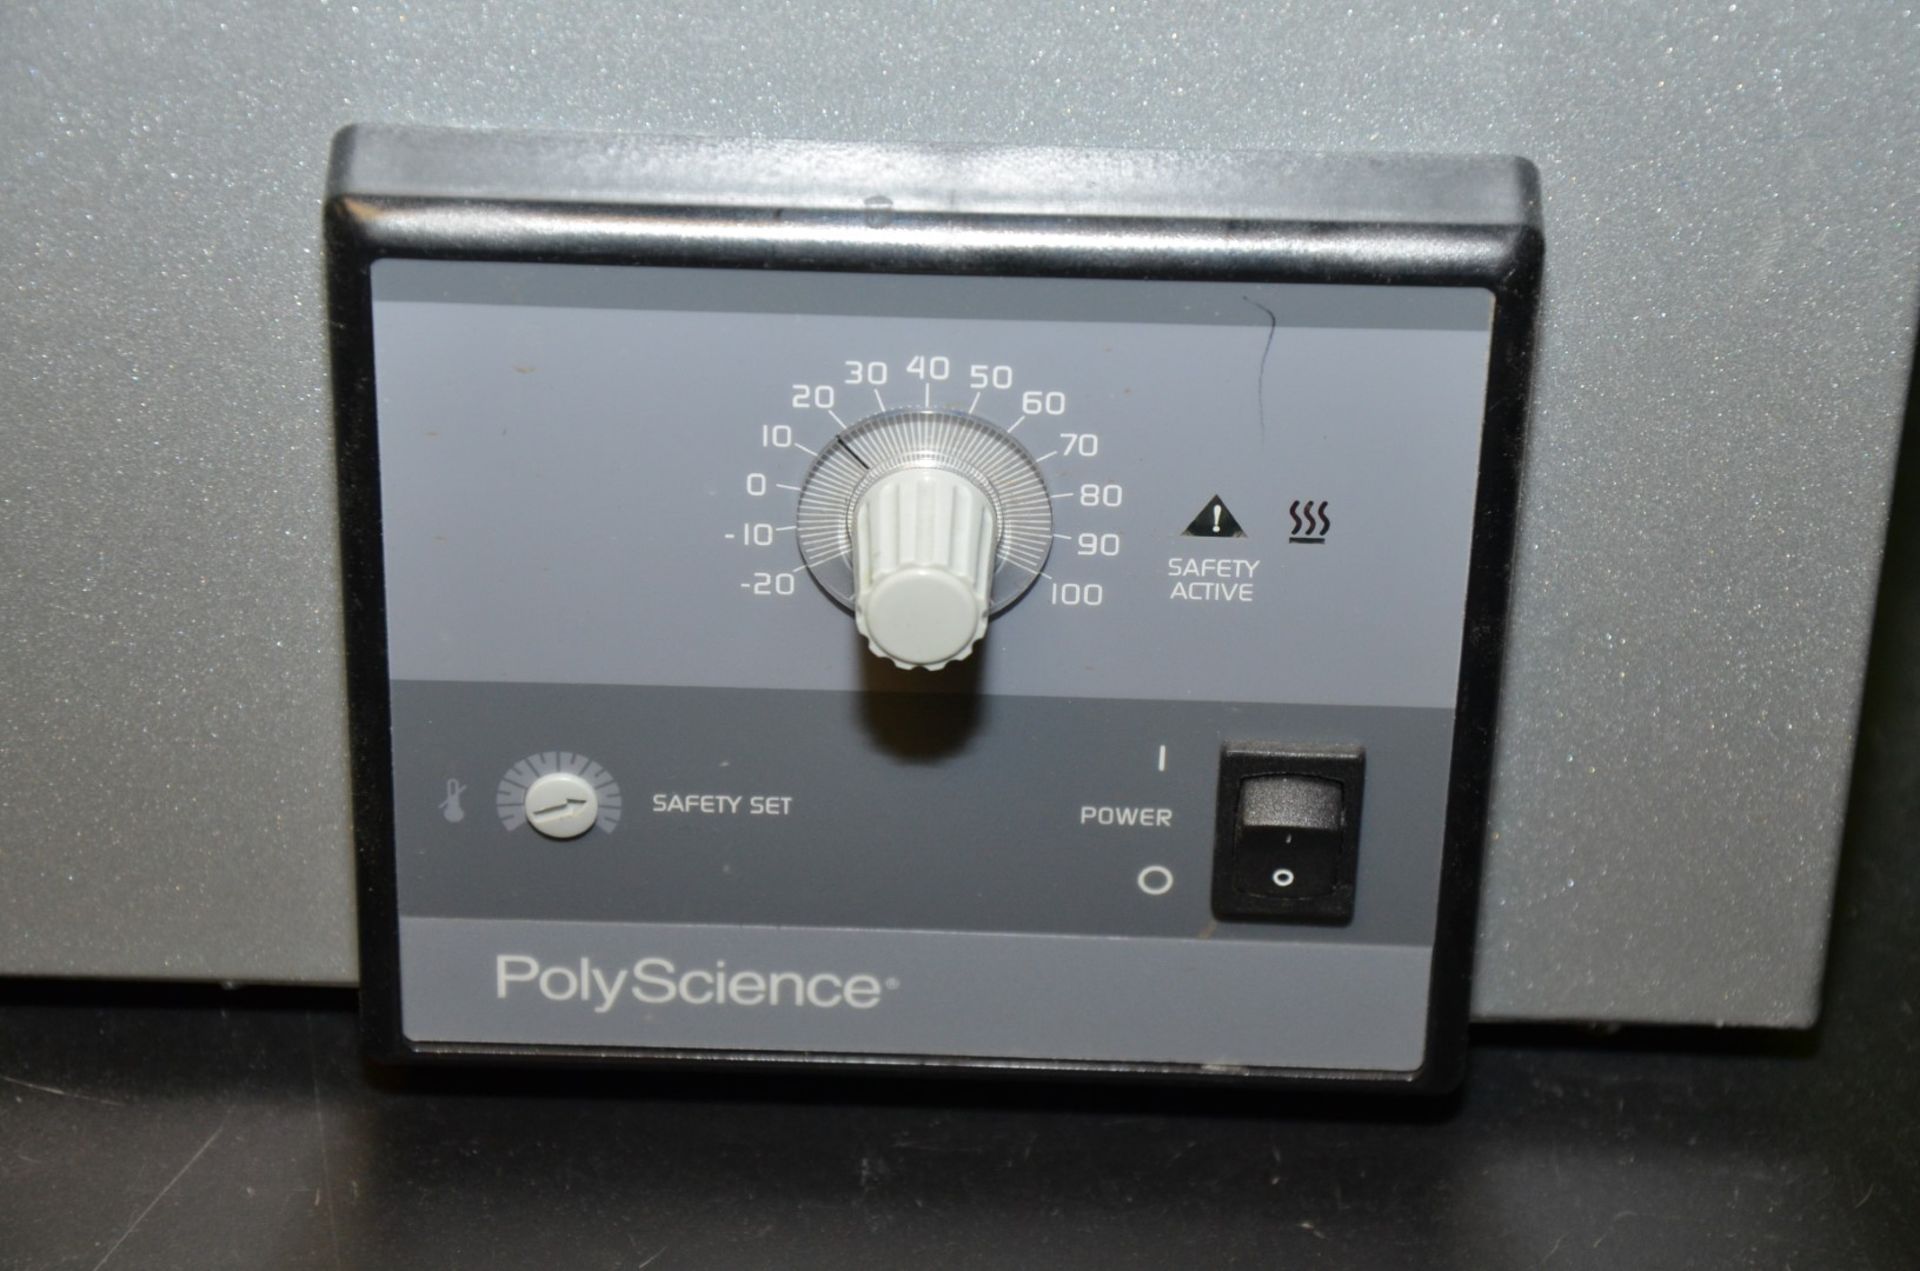 POLYSCIENCE WA28L11B STAINLESS STEEL LABORATORY HOT BATH WITH ANALOG TEMPERATURE CONTROL, SAFETY SET - Image 3 of 5